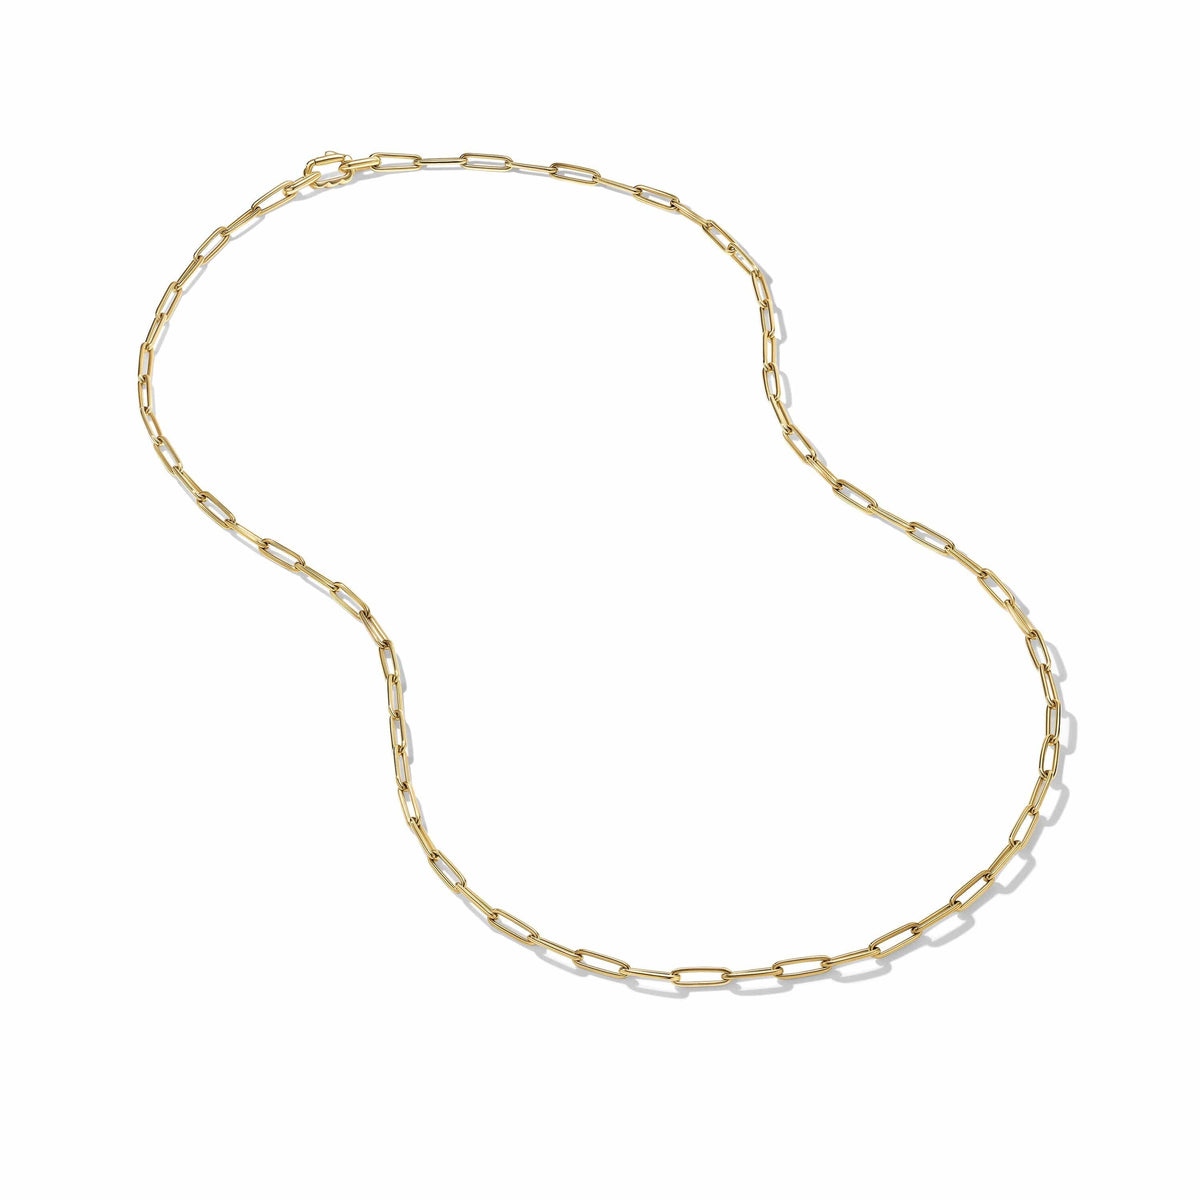 Chain Link Necklace in 18K Yellow Gold